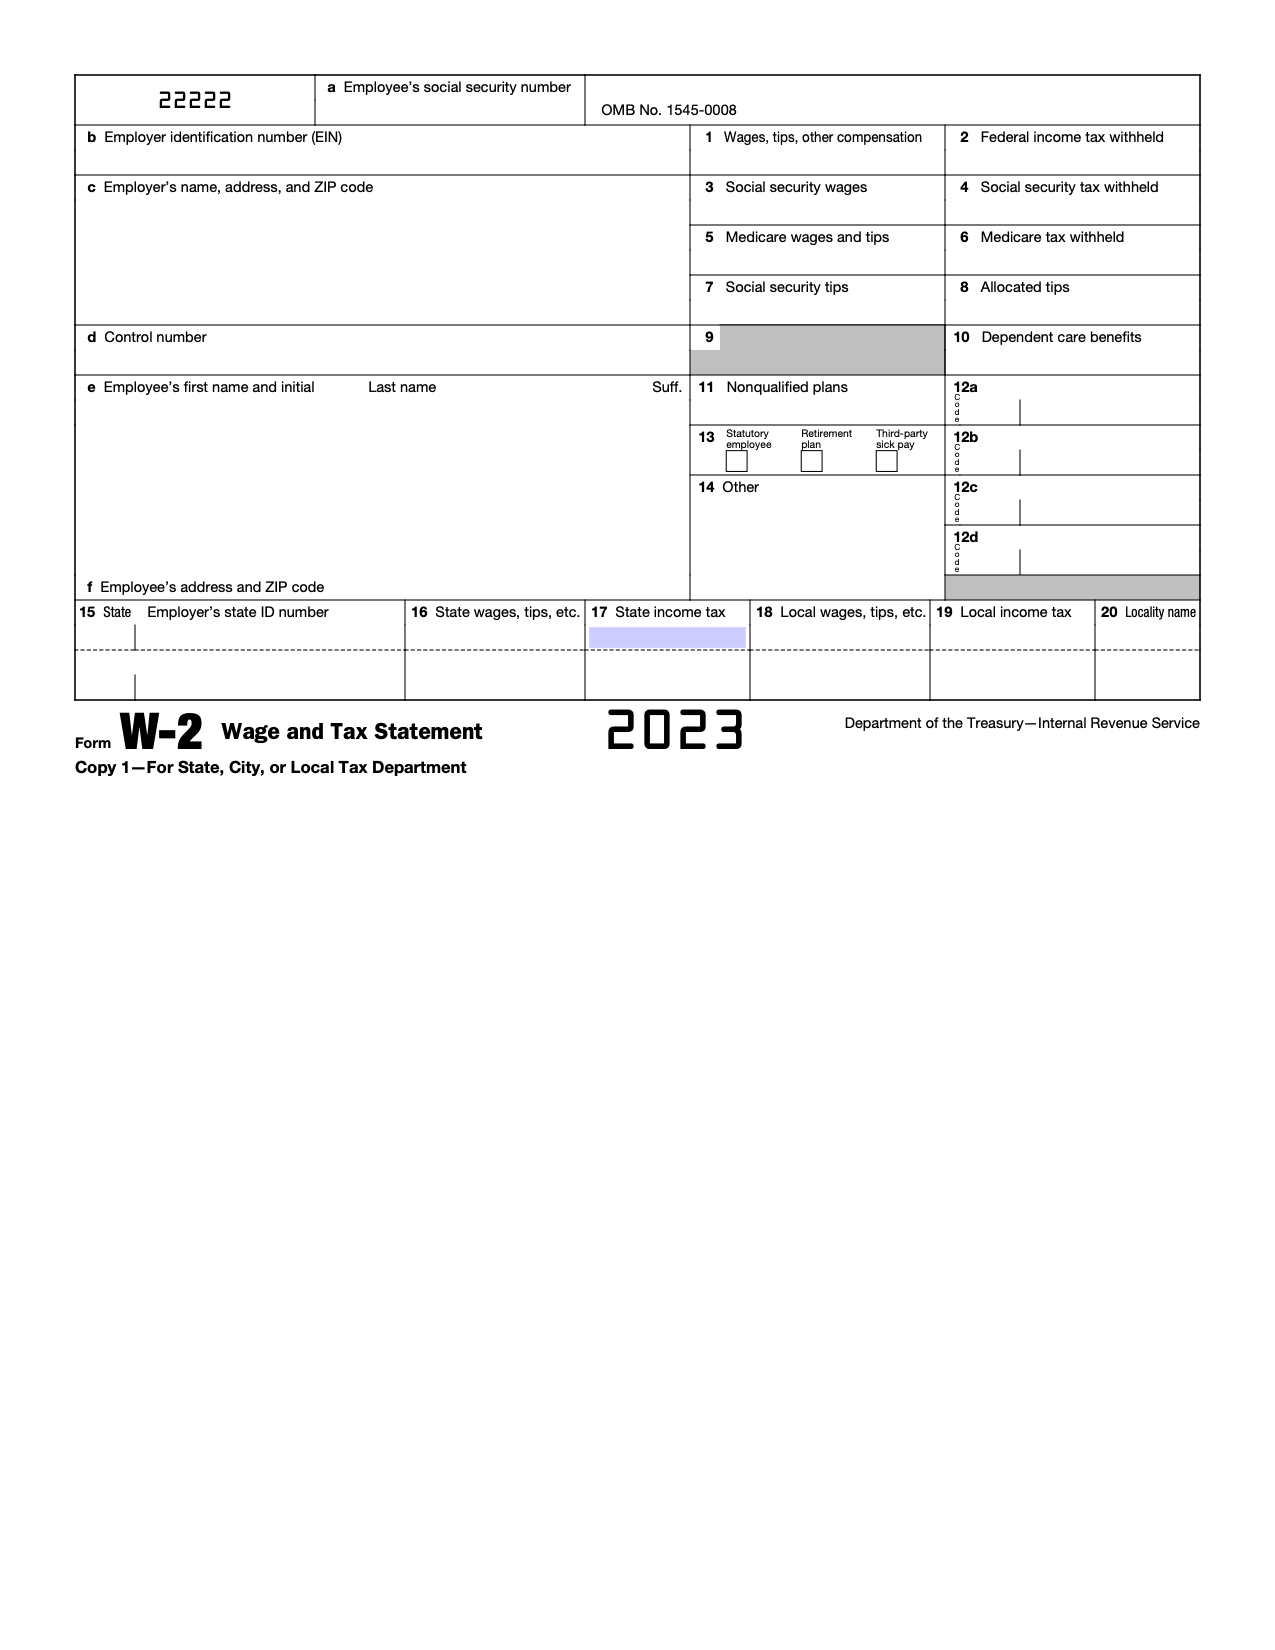 Free Irs Form W-2 | Wage And Tax Statement - Pdf – Eforms pertaining to Forma W2